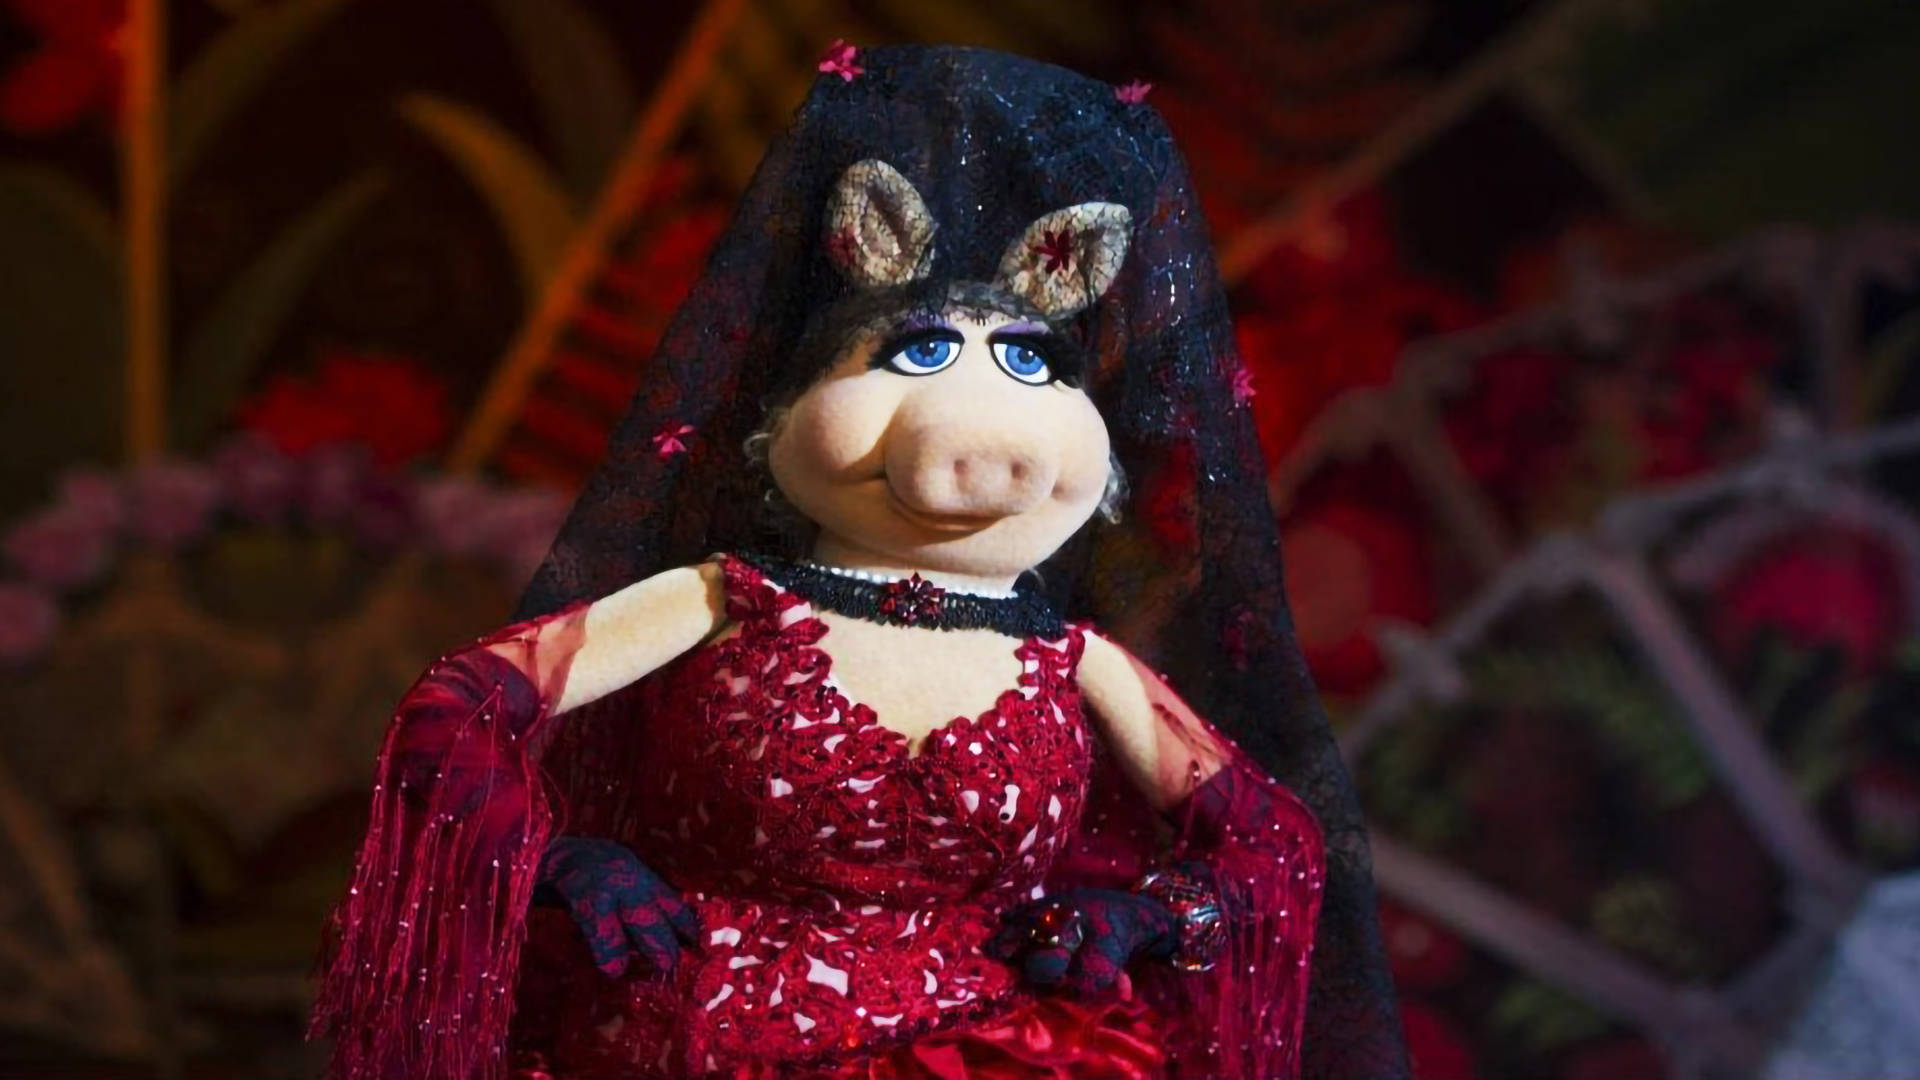 Miss Piggy In A Stellar Performance During An Opera Scene In Muppets Most Wanted. Background